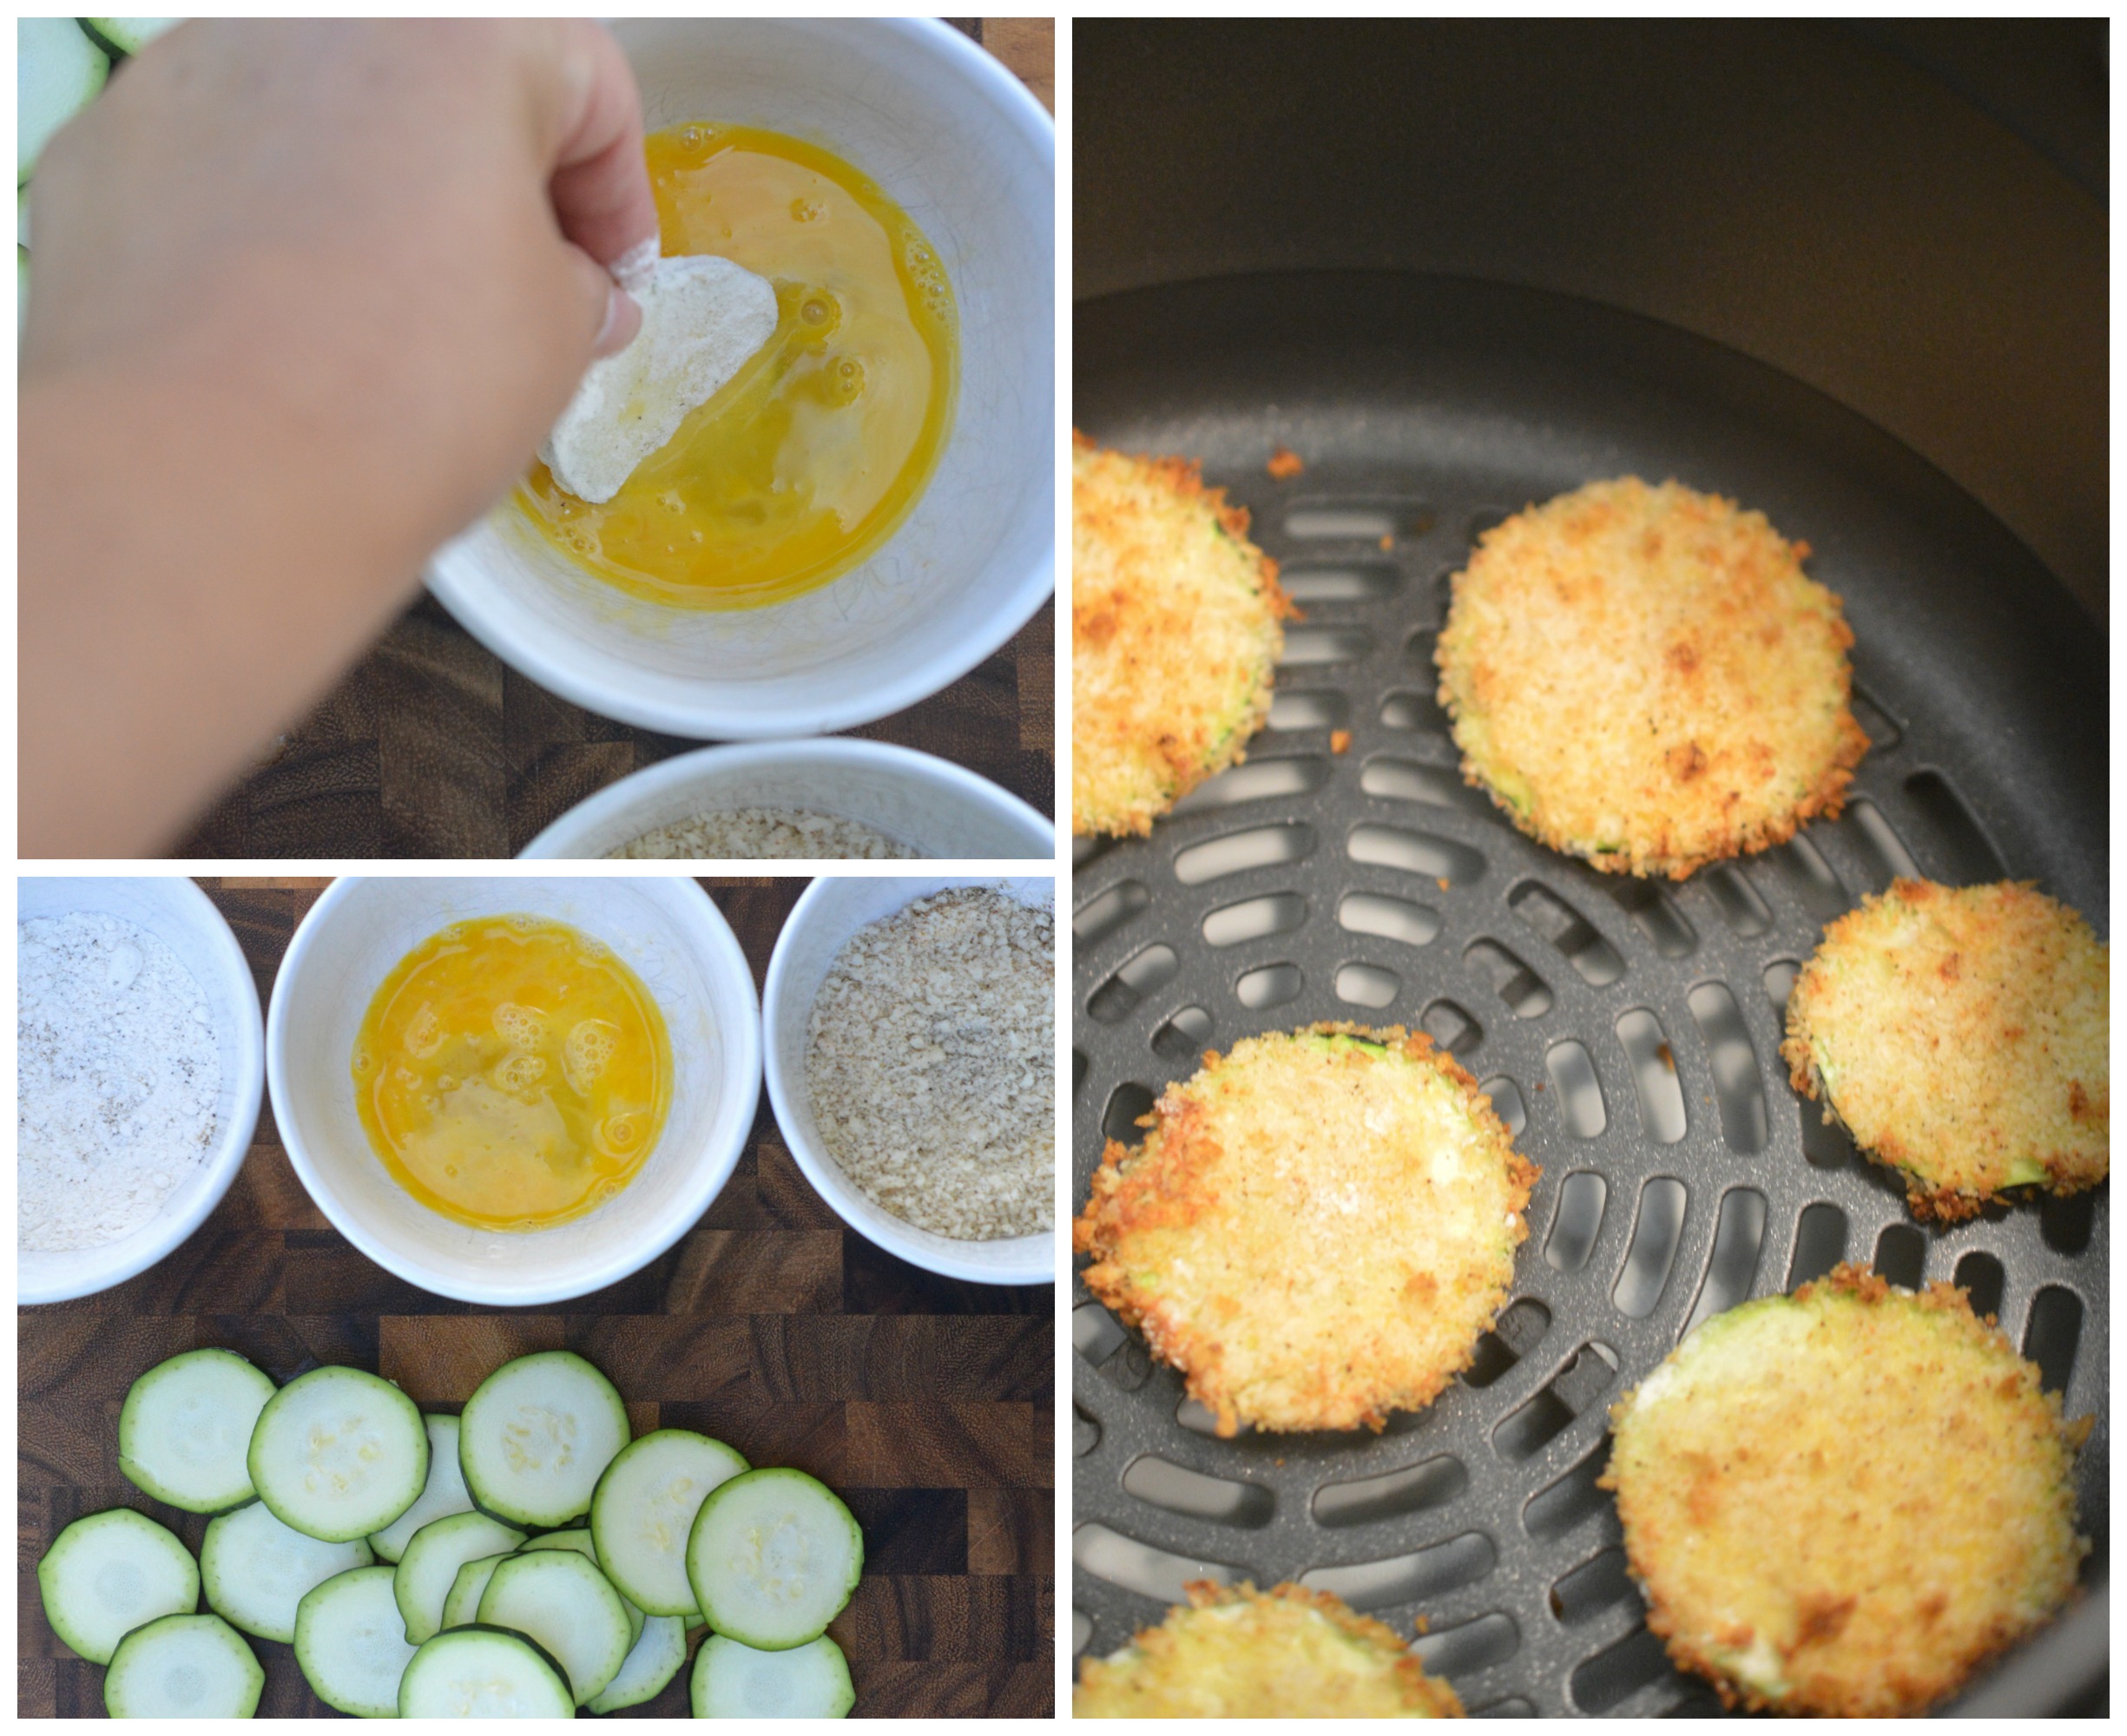 Making Zucchini Chips using the Ninja Foodie Deluxe Air Fryer